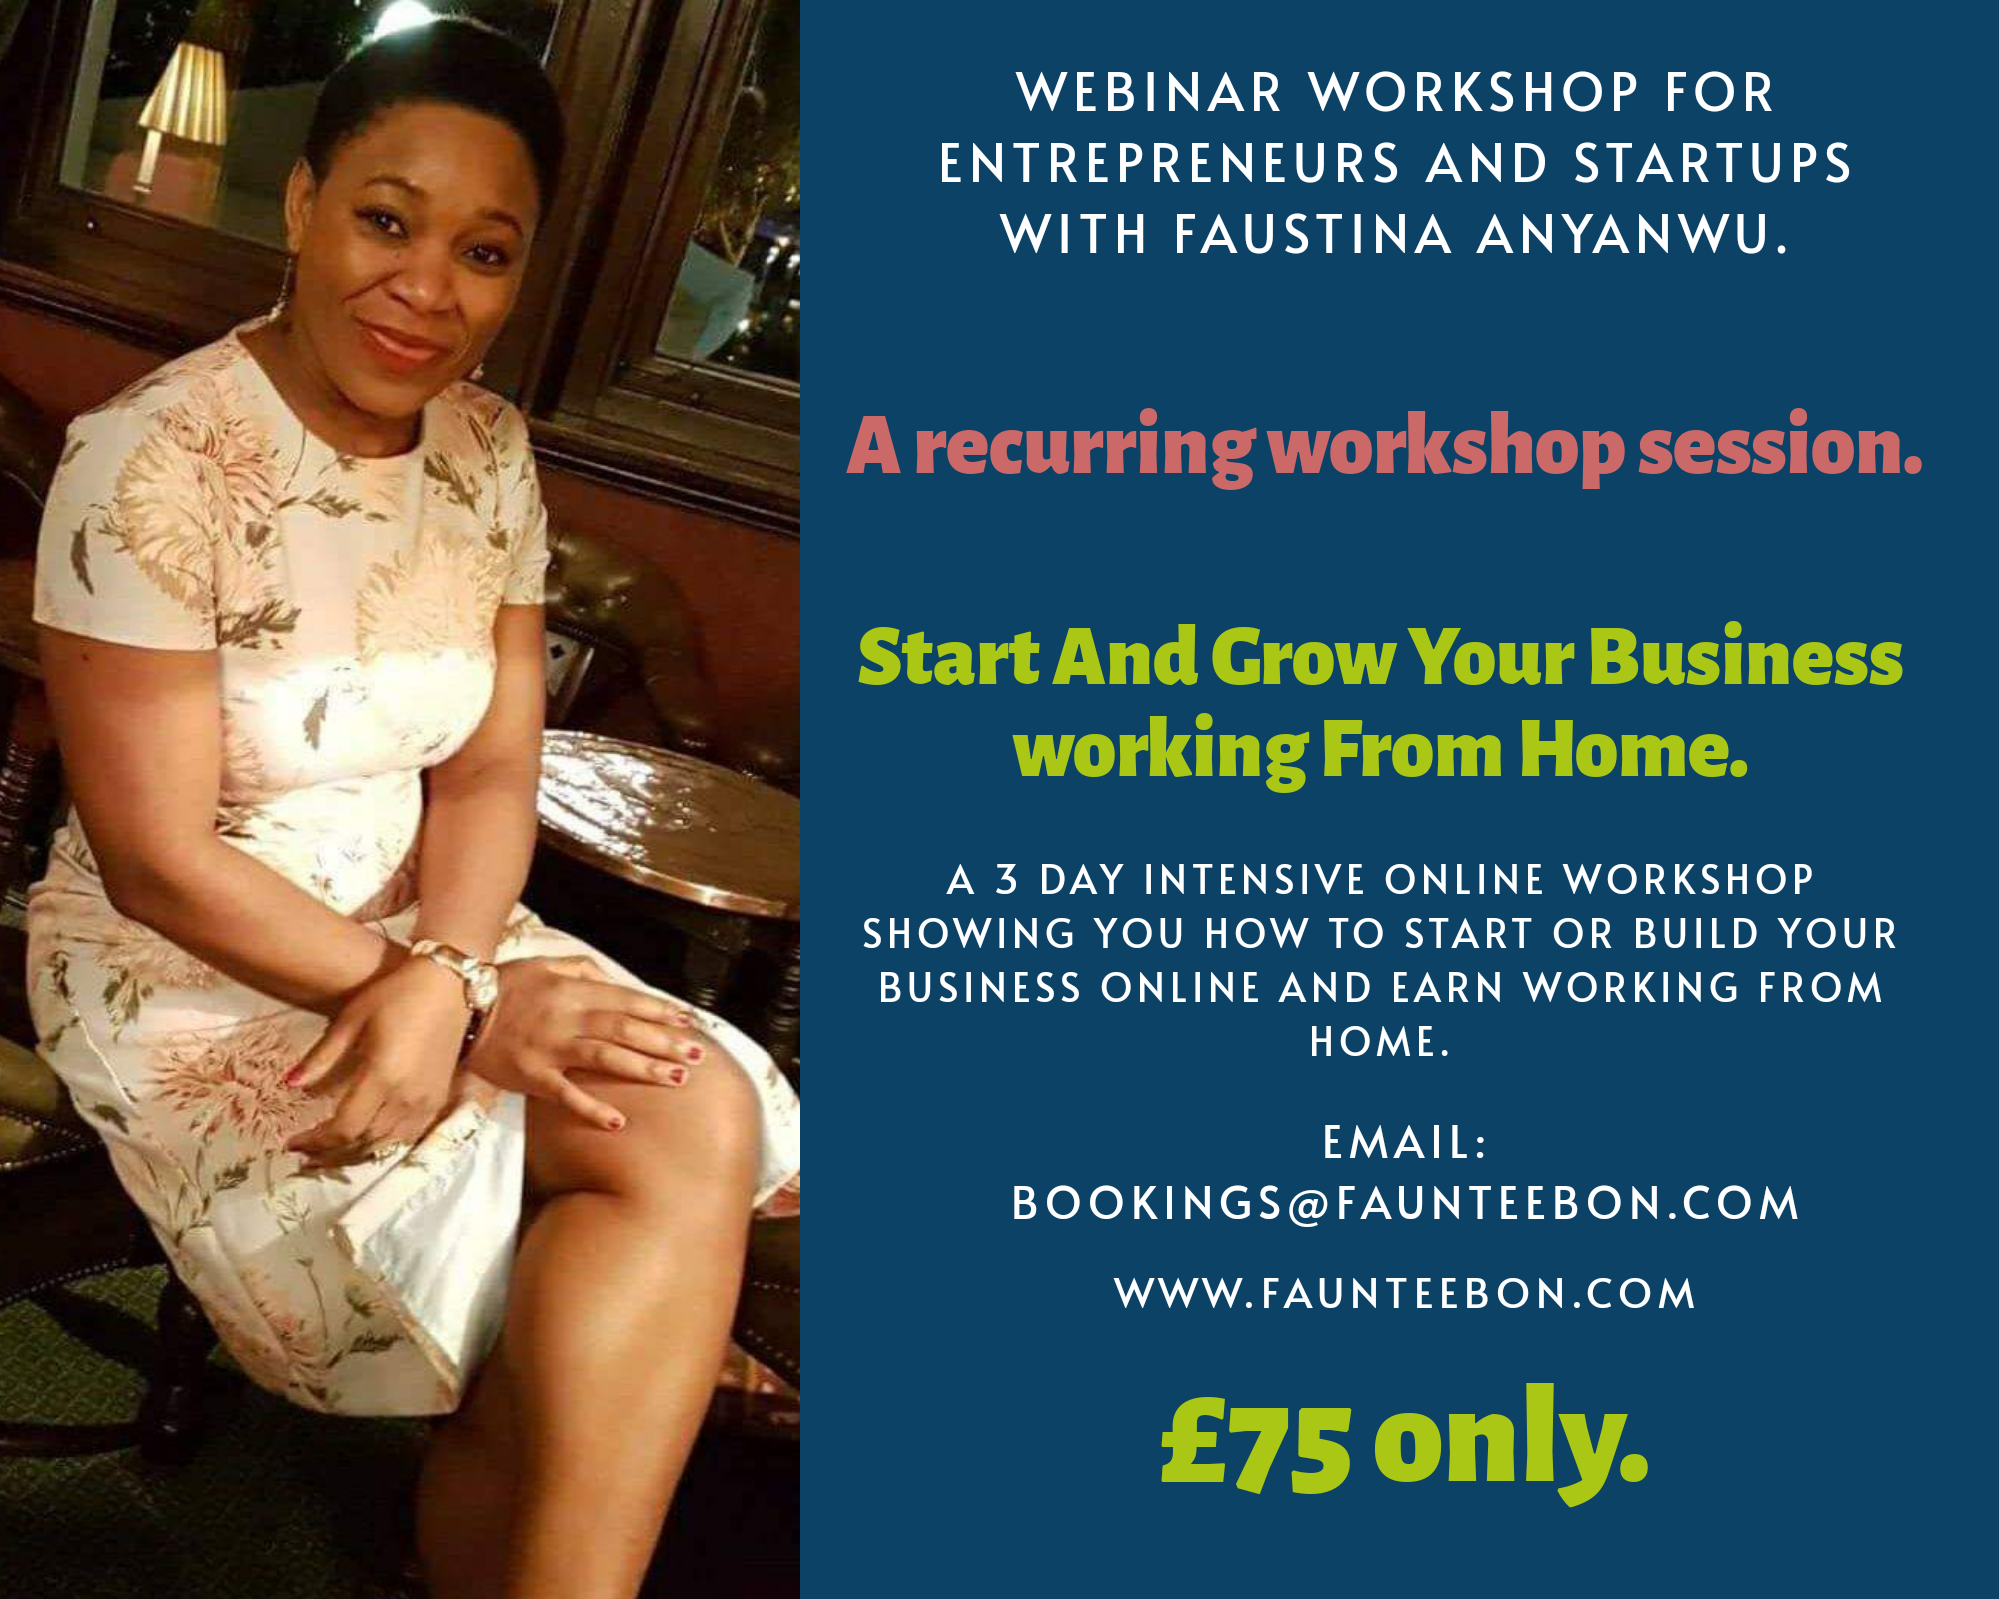 Recurring business and career workshop